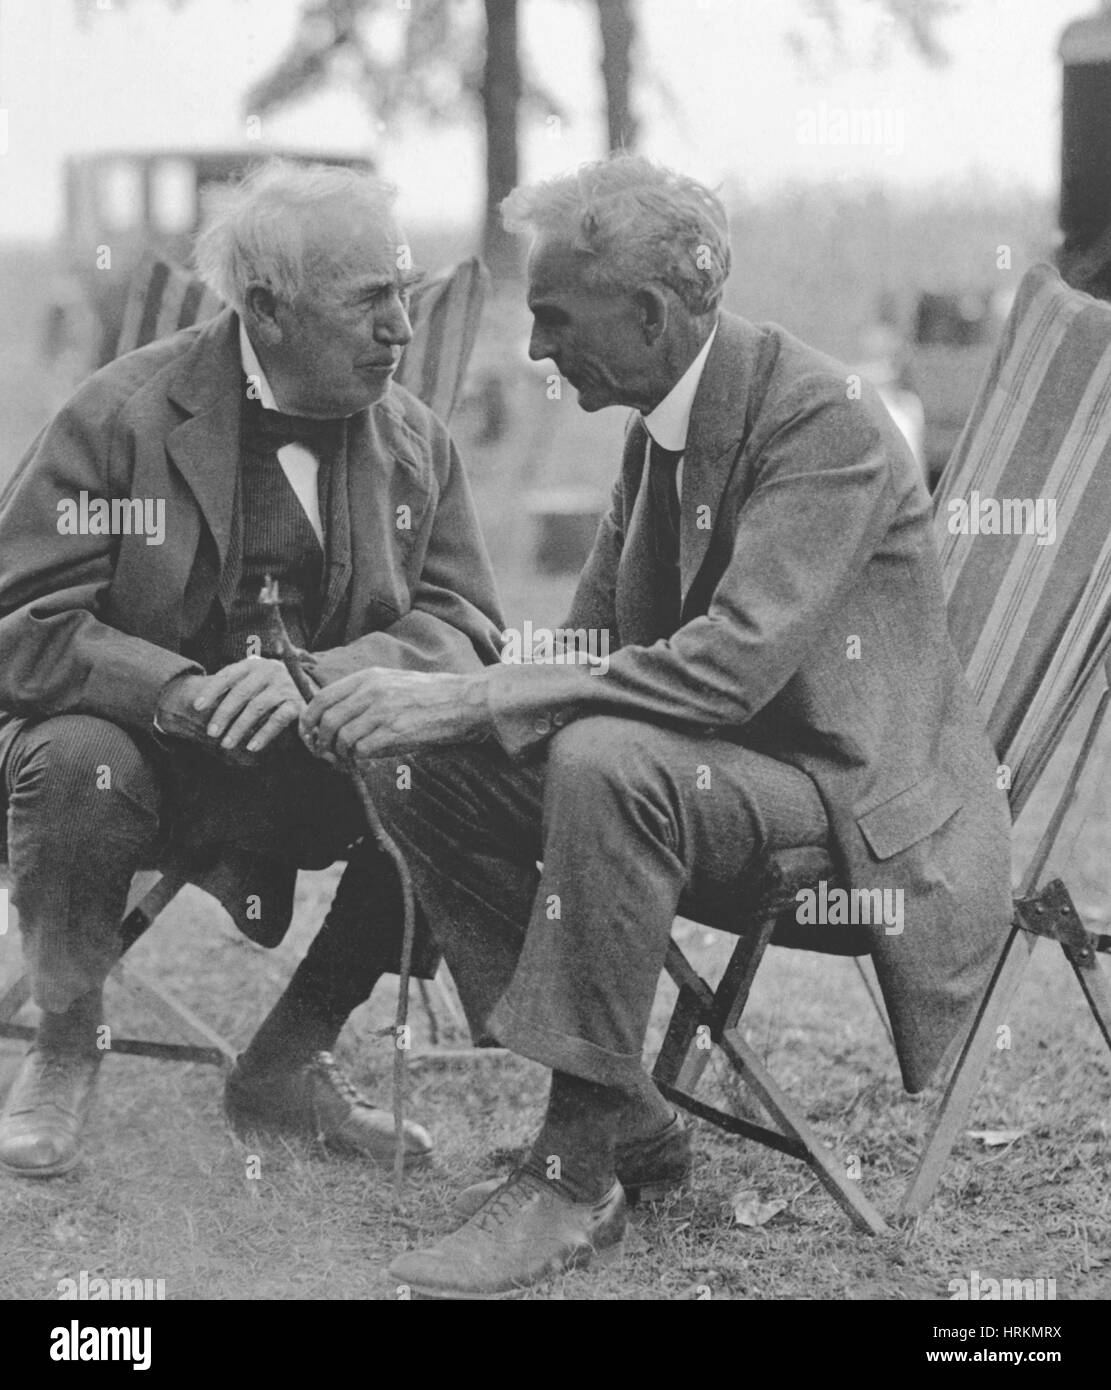 Henry Ford and Thomas Edison, American Inventors Stock Photo